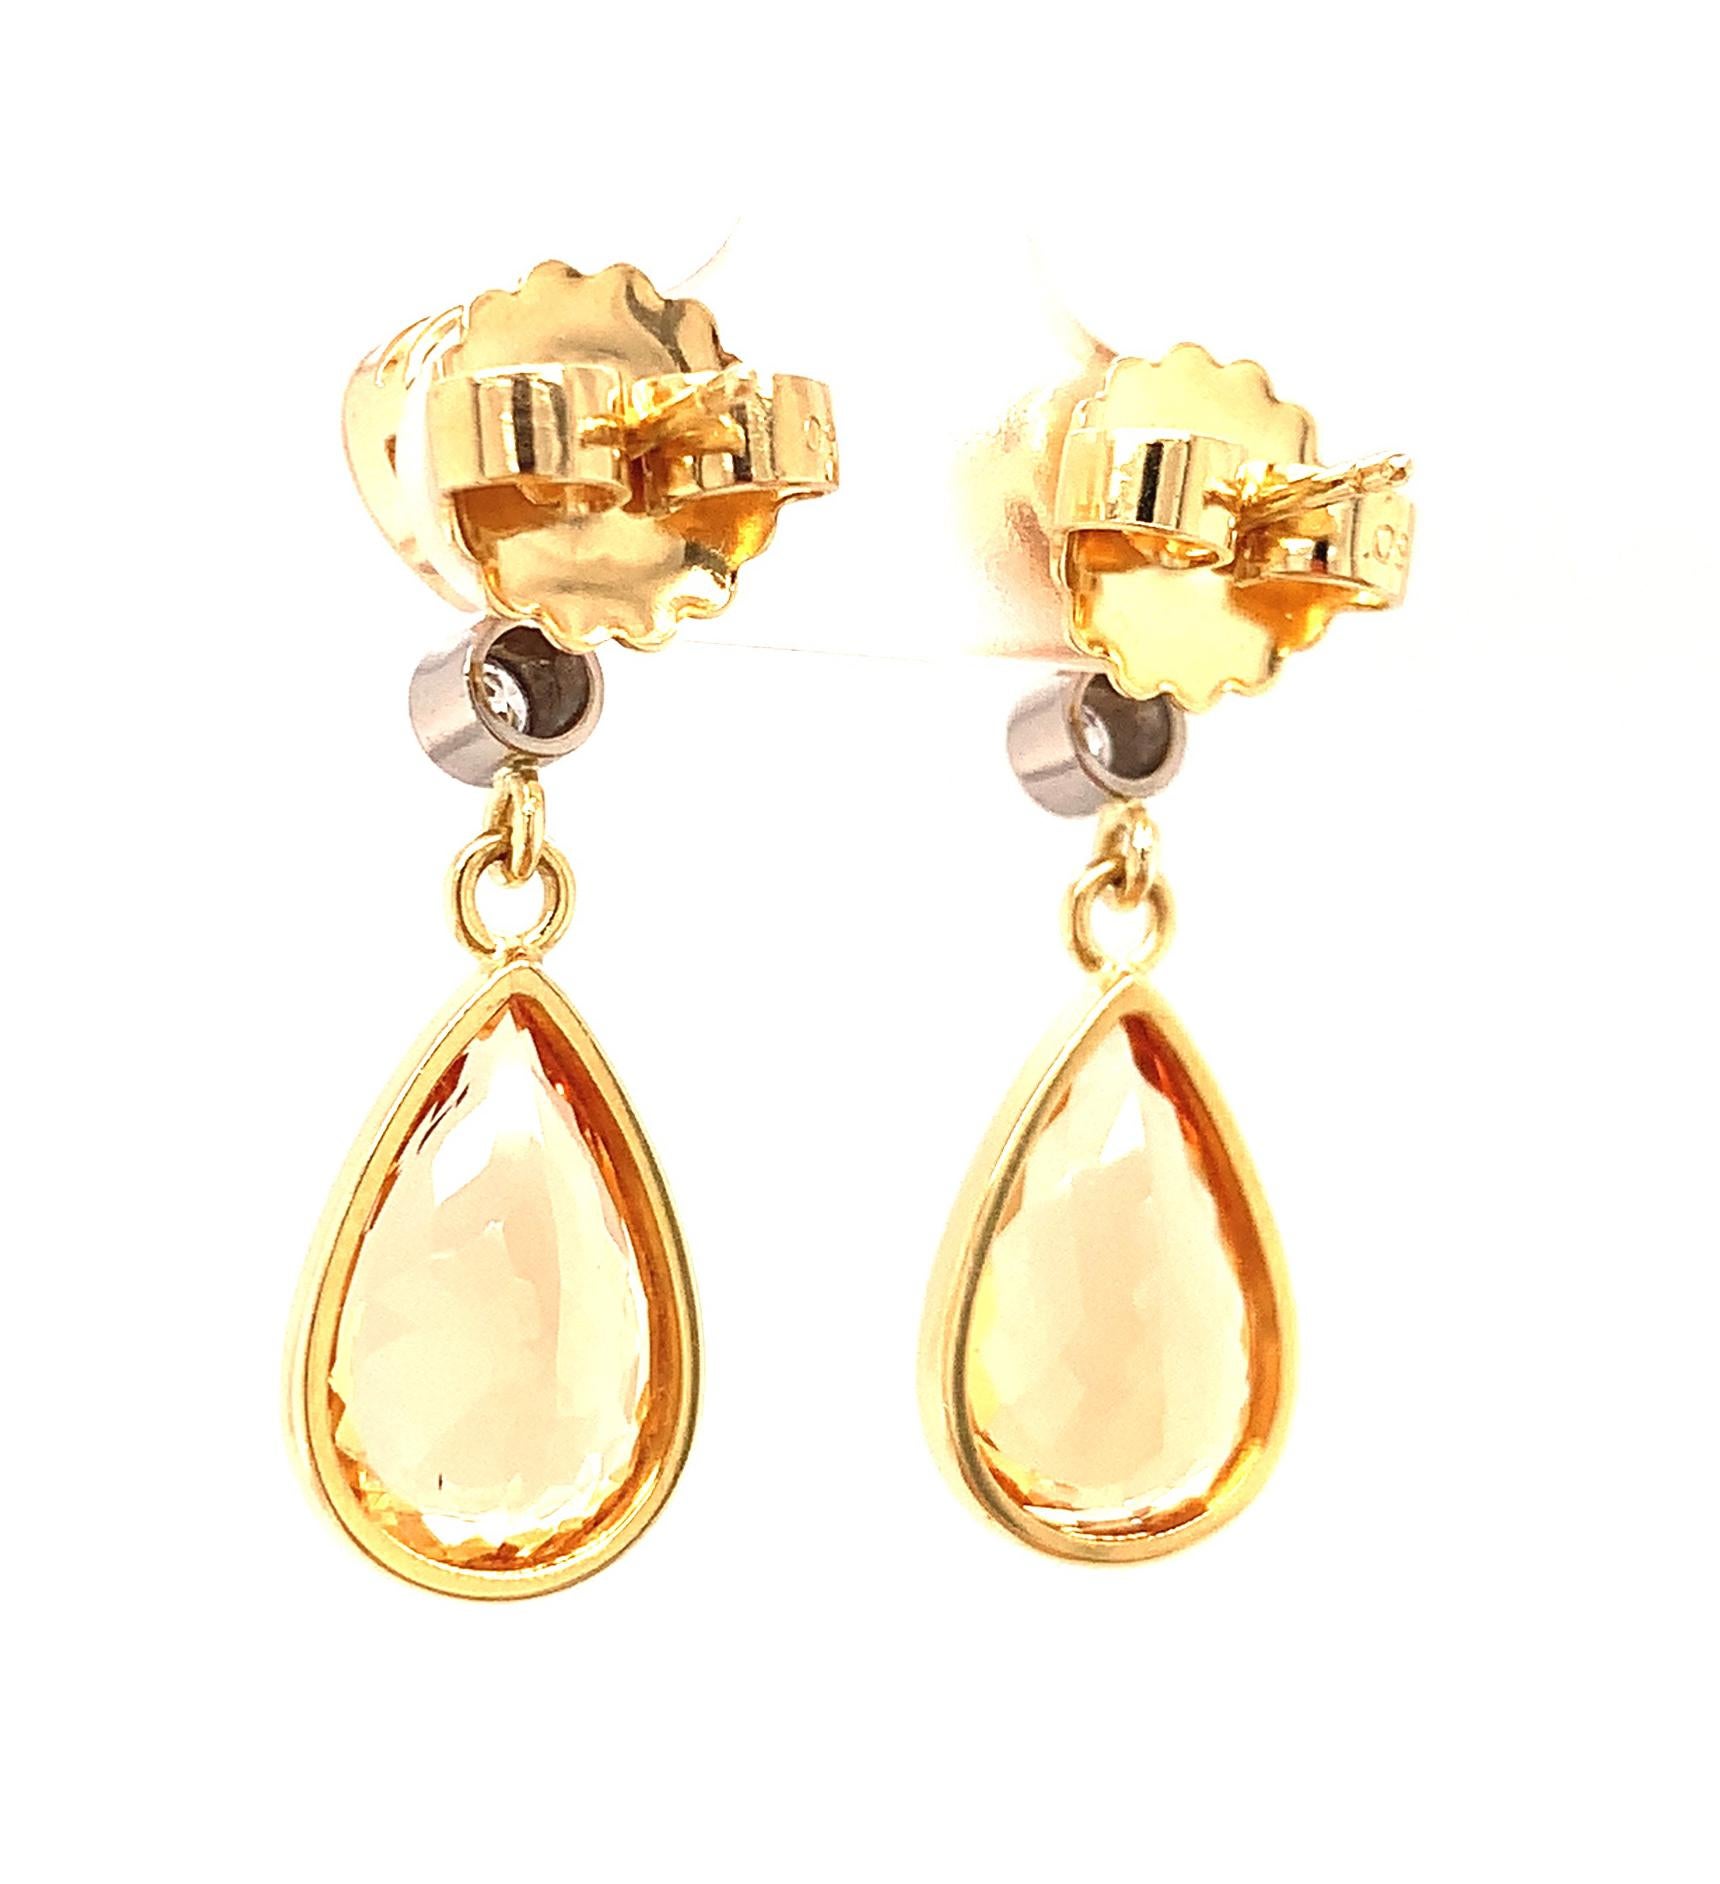 Precious Topaz and Garnet Drop Earrings 18K Yellow Gold, 9.74 Carats Total  For Sale 2